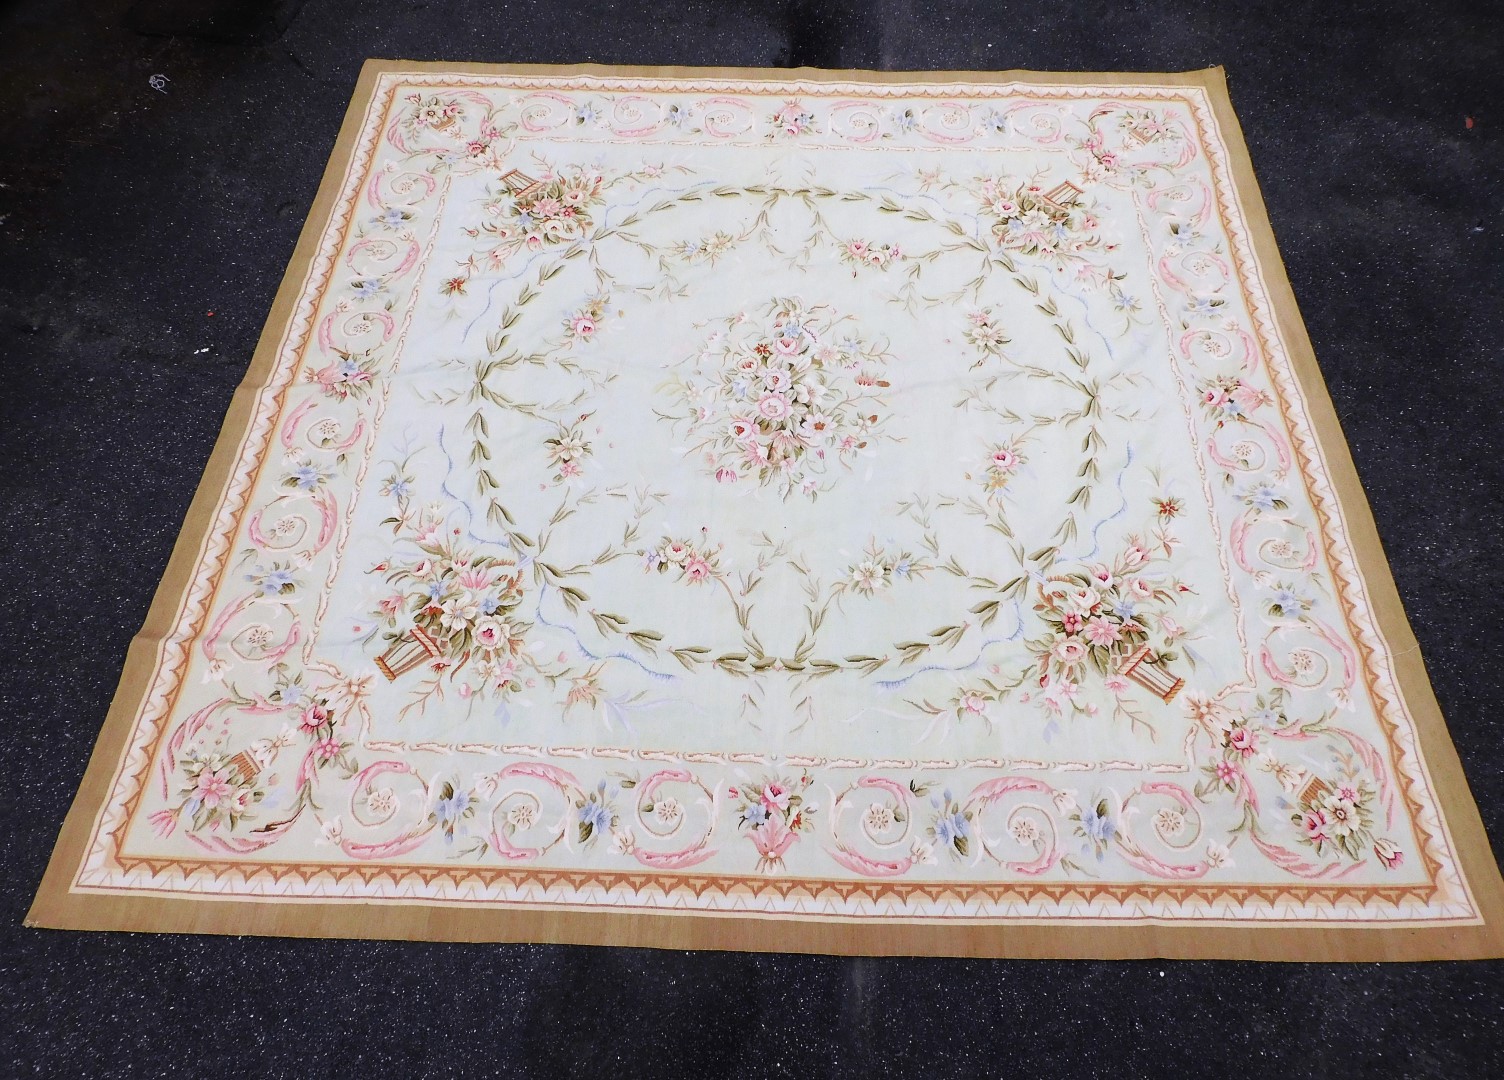 An Aubusson style tapestry hanging or rug, decorated with scrolls, urns, flowers, in pastel colours